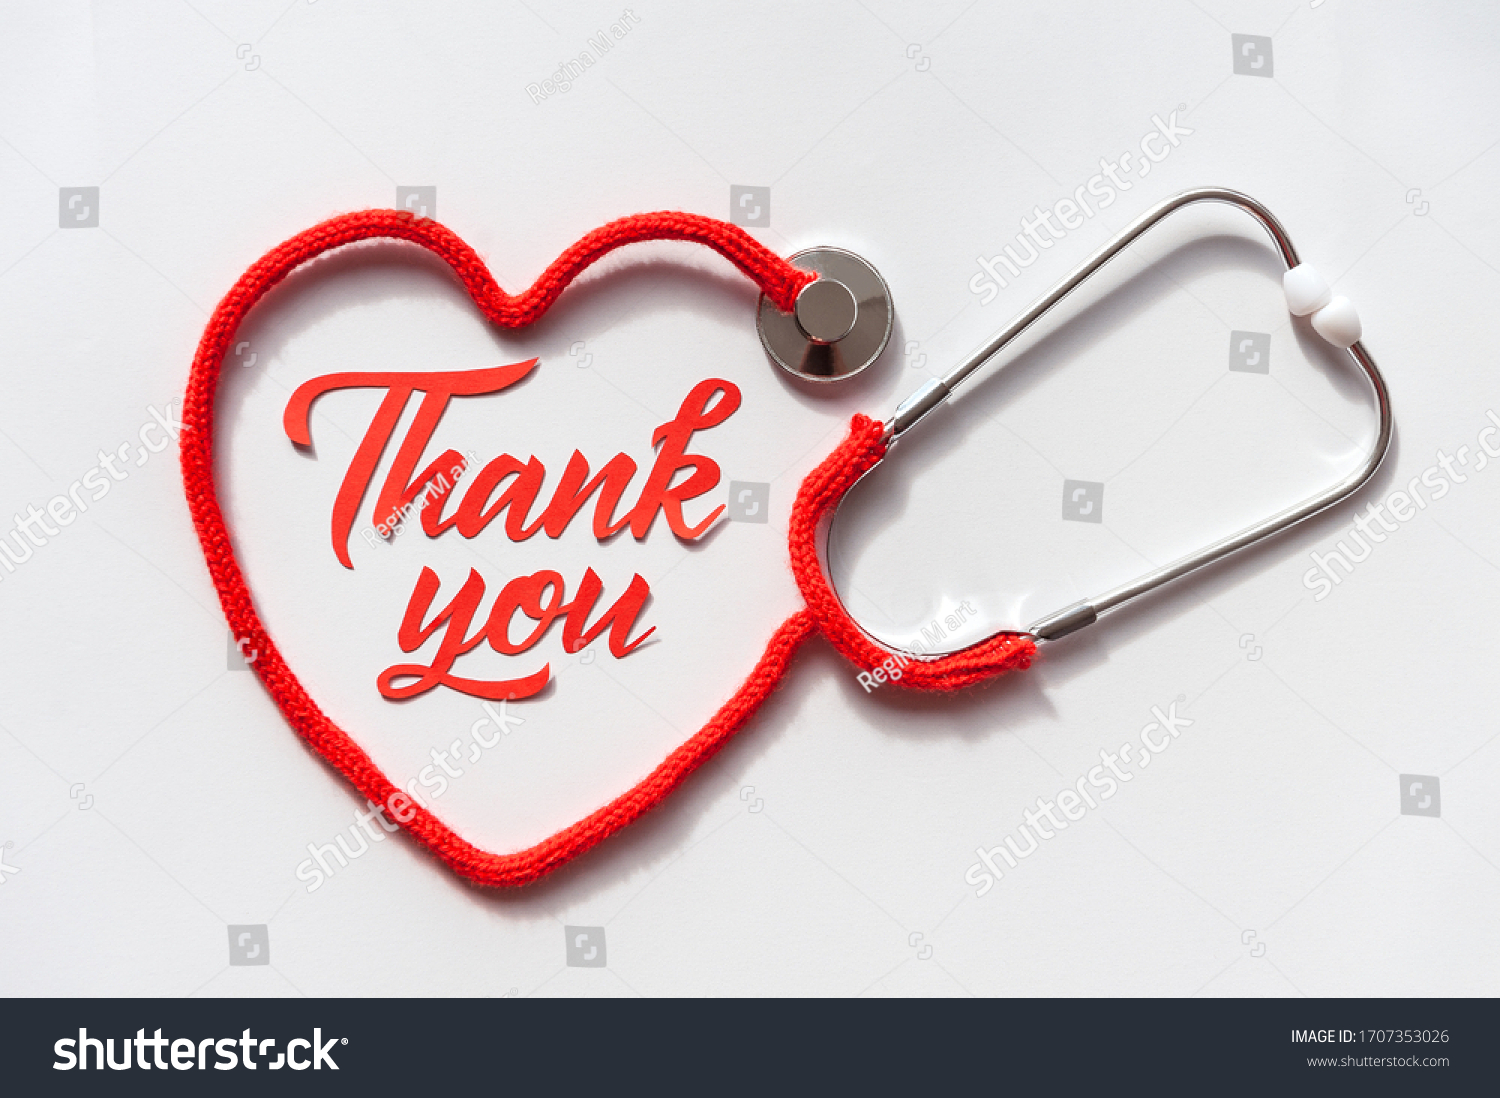 Stethoscope Forming Heart Cord Thank You Stock Photo Edit Now 1707353026